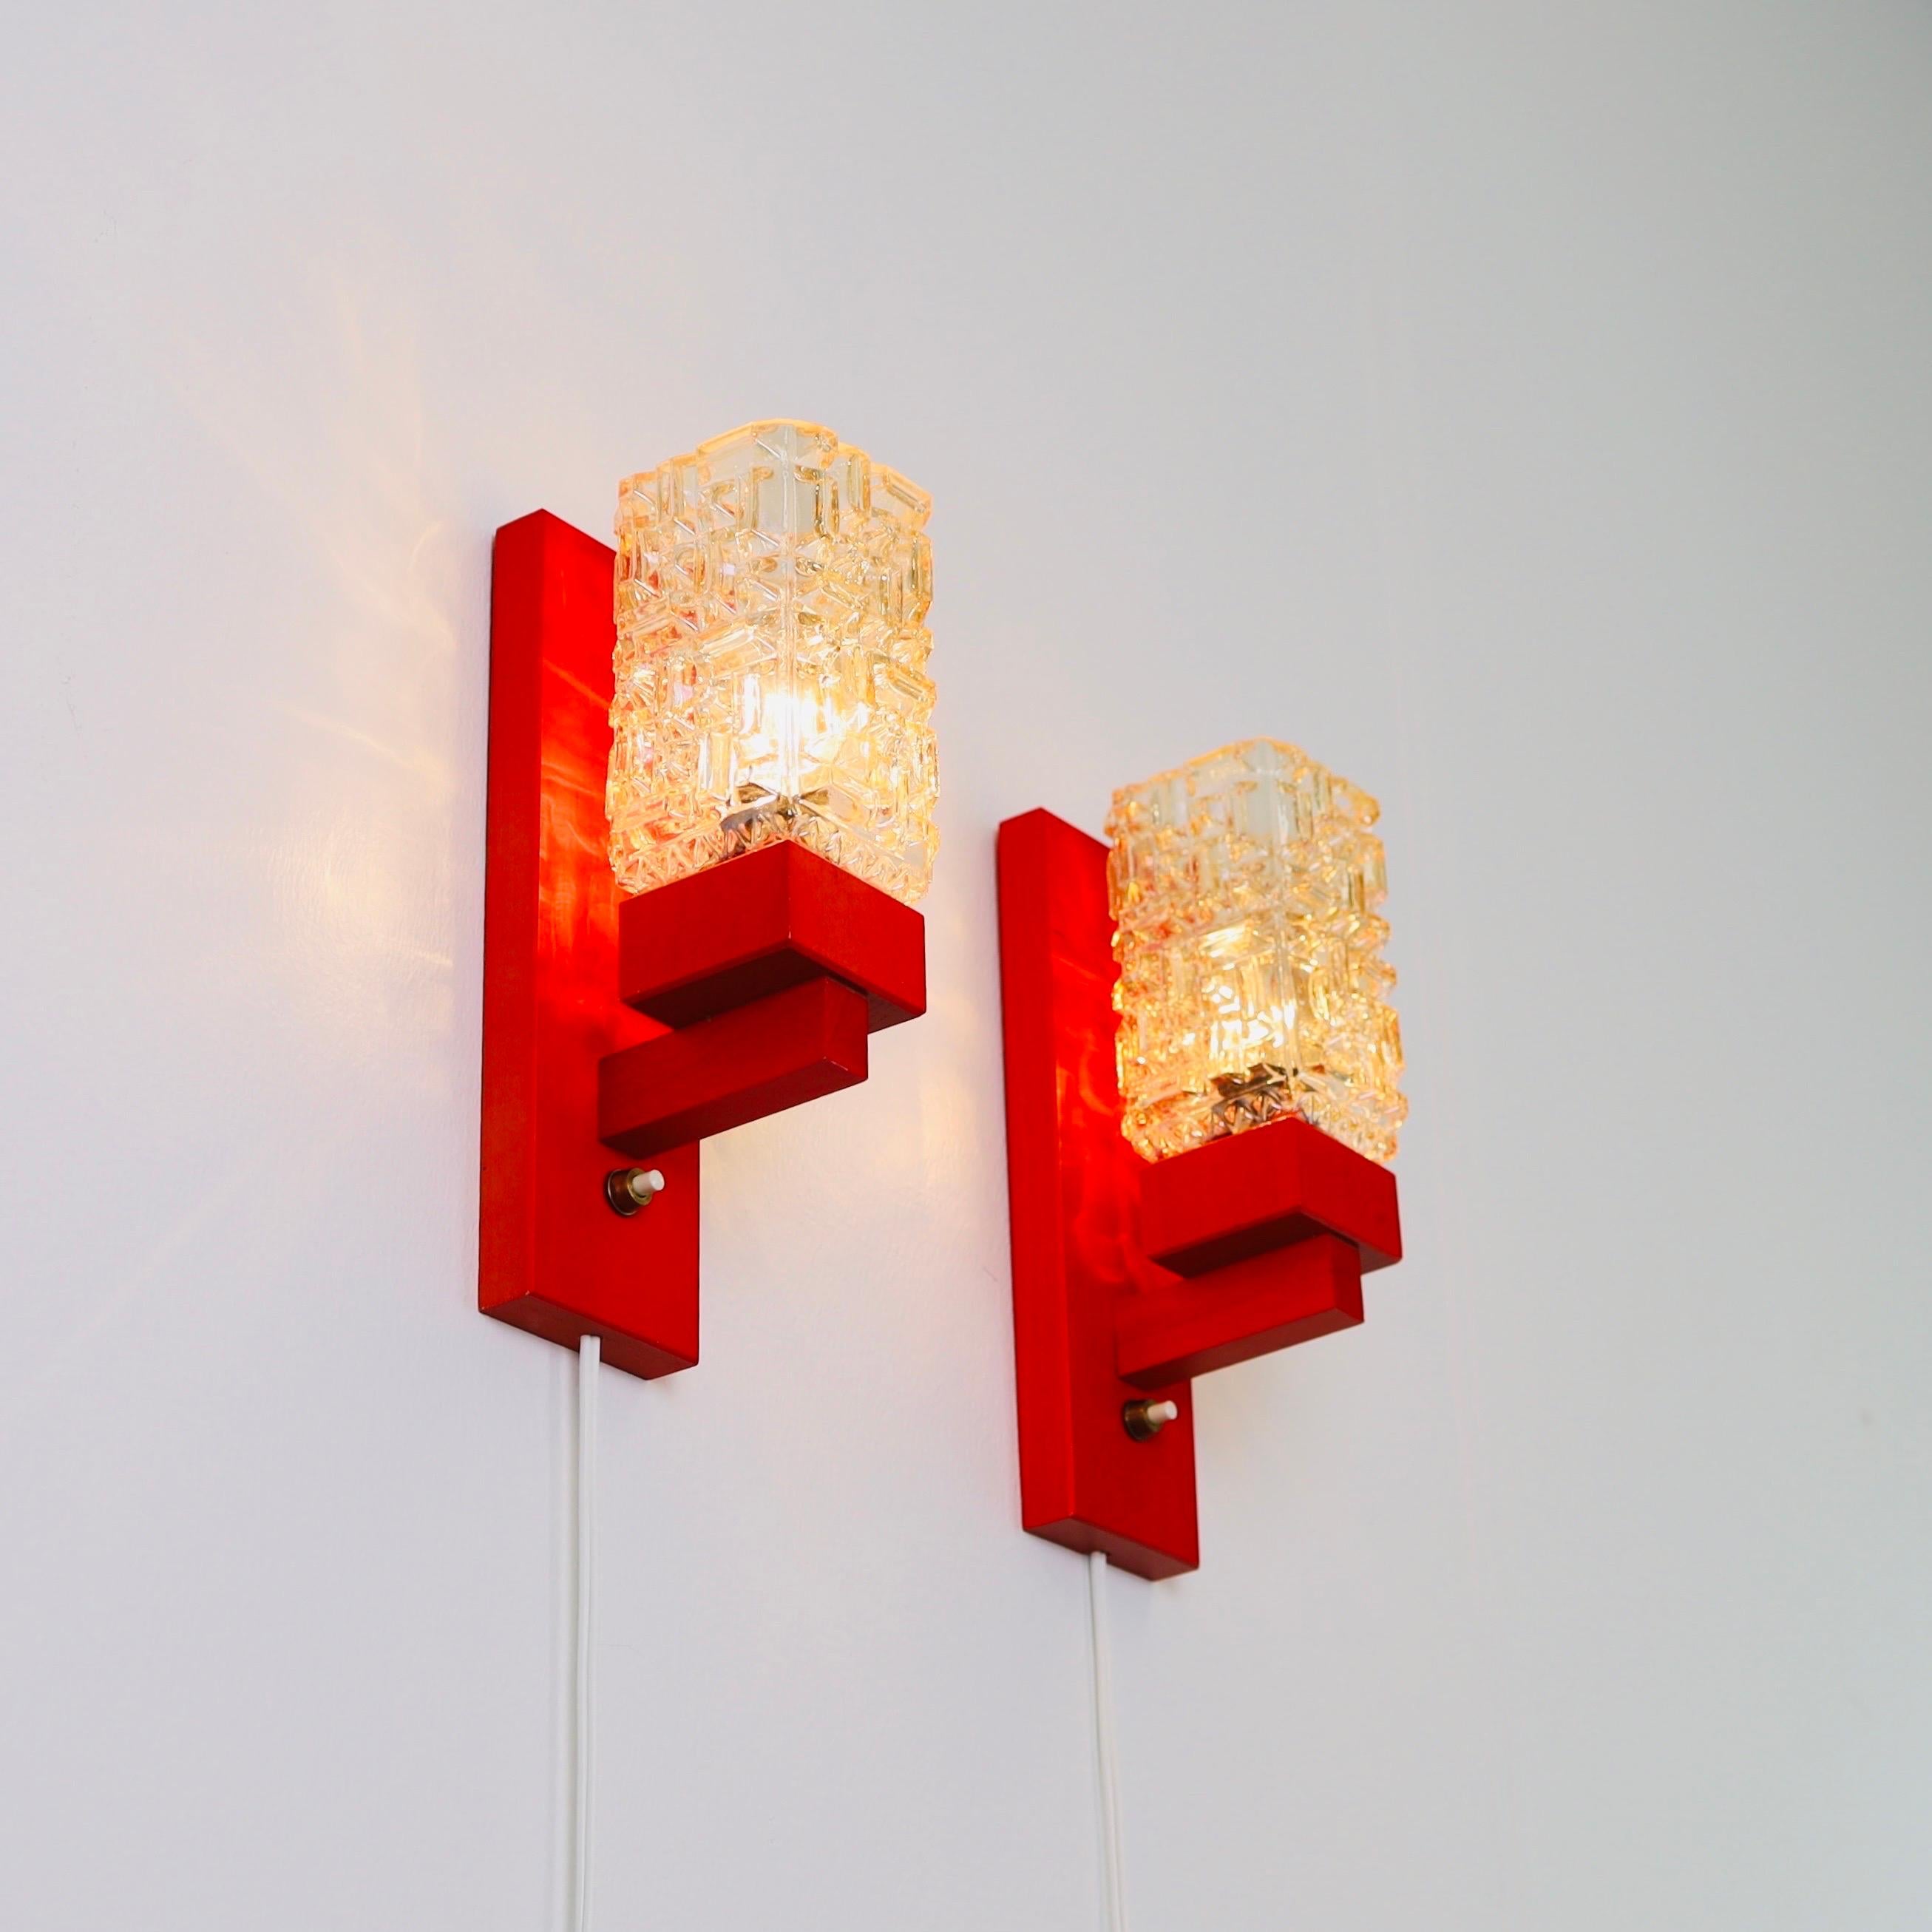 Exquisite set of Danish Modern wall lamps in Red stained Scandinavian beech wood and amber colored glass shades. The sconces were made in the 1970s by the Danish workshop 'Vitrika'. 

* A set (2) red stained wood wall lamps with amber glass shades
*